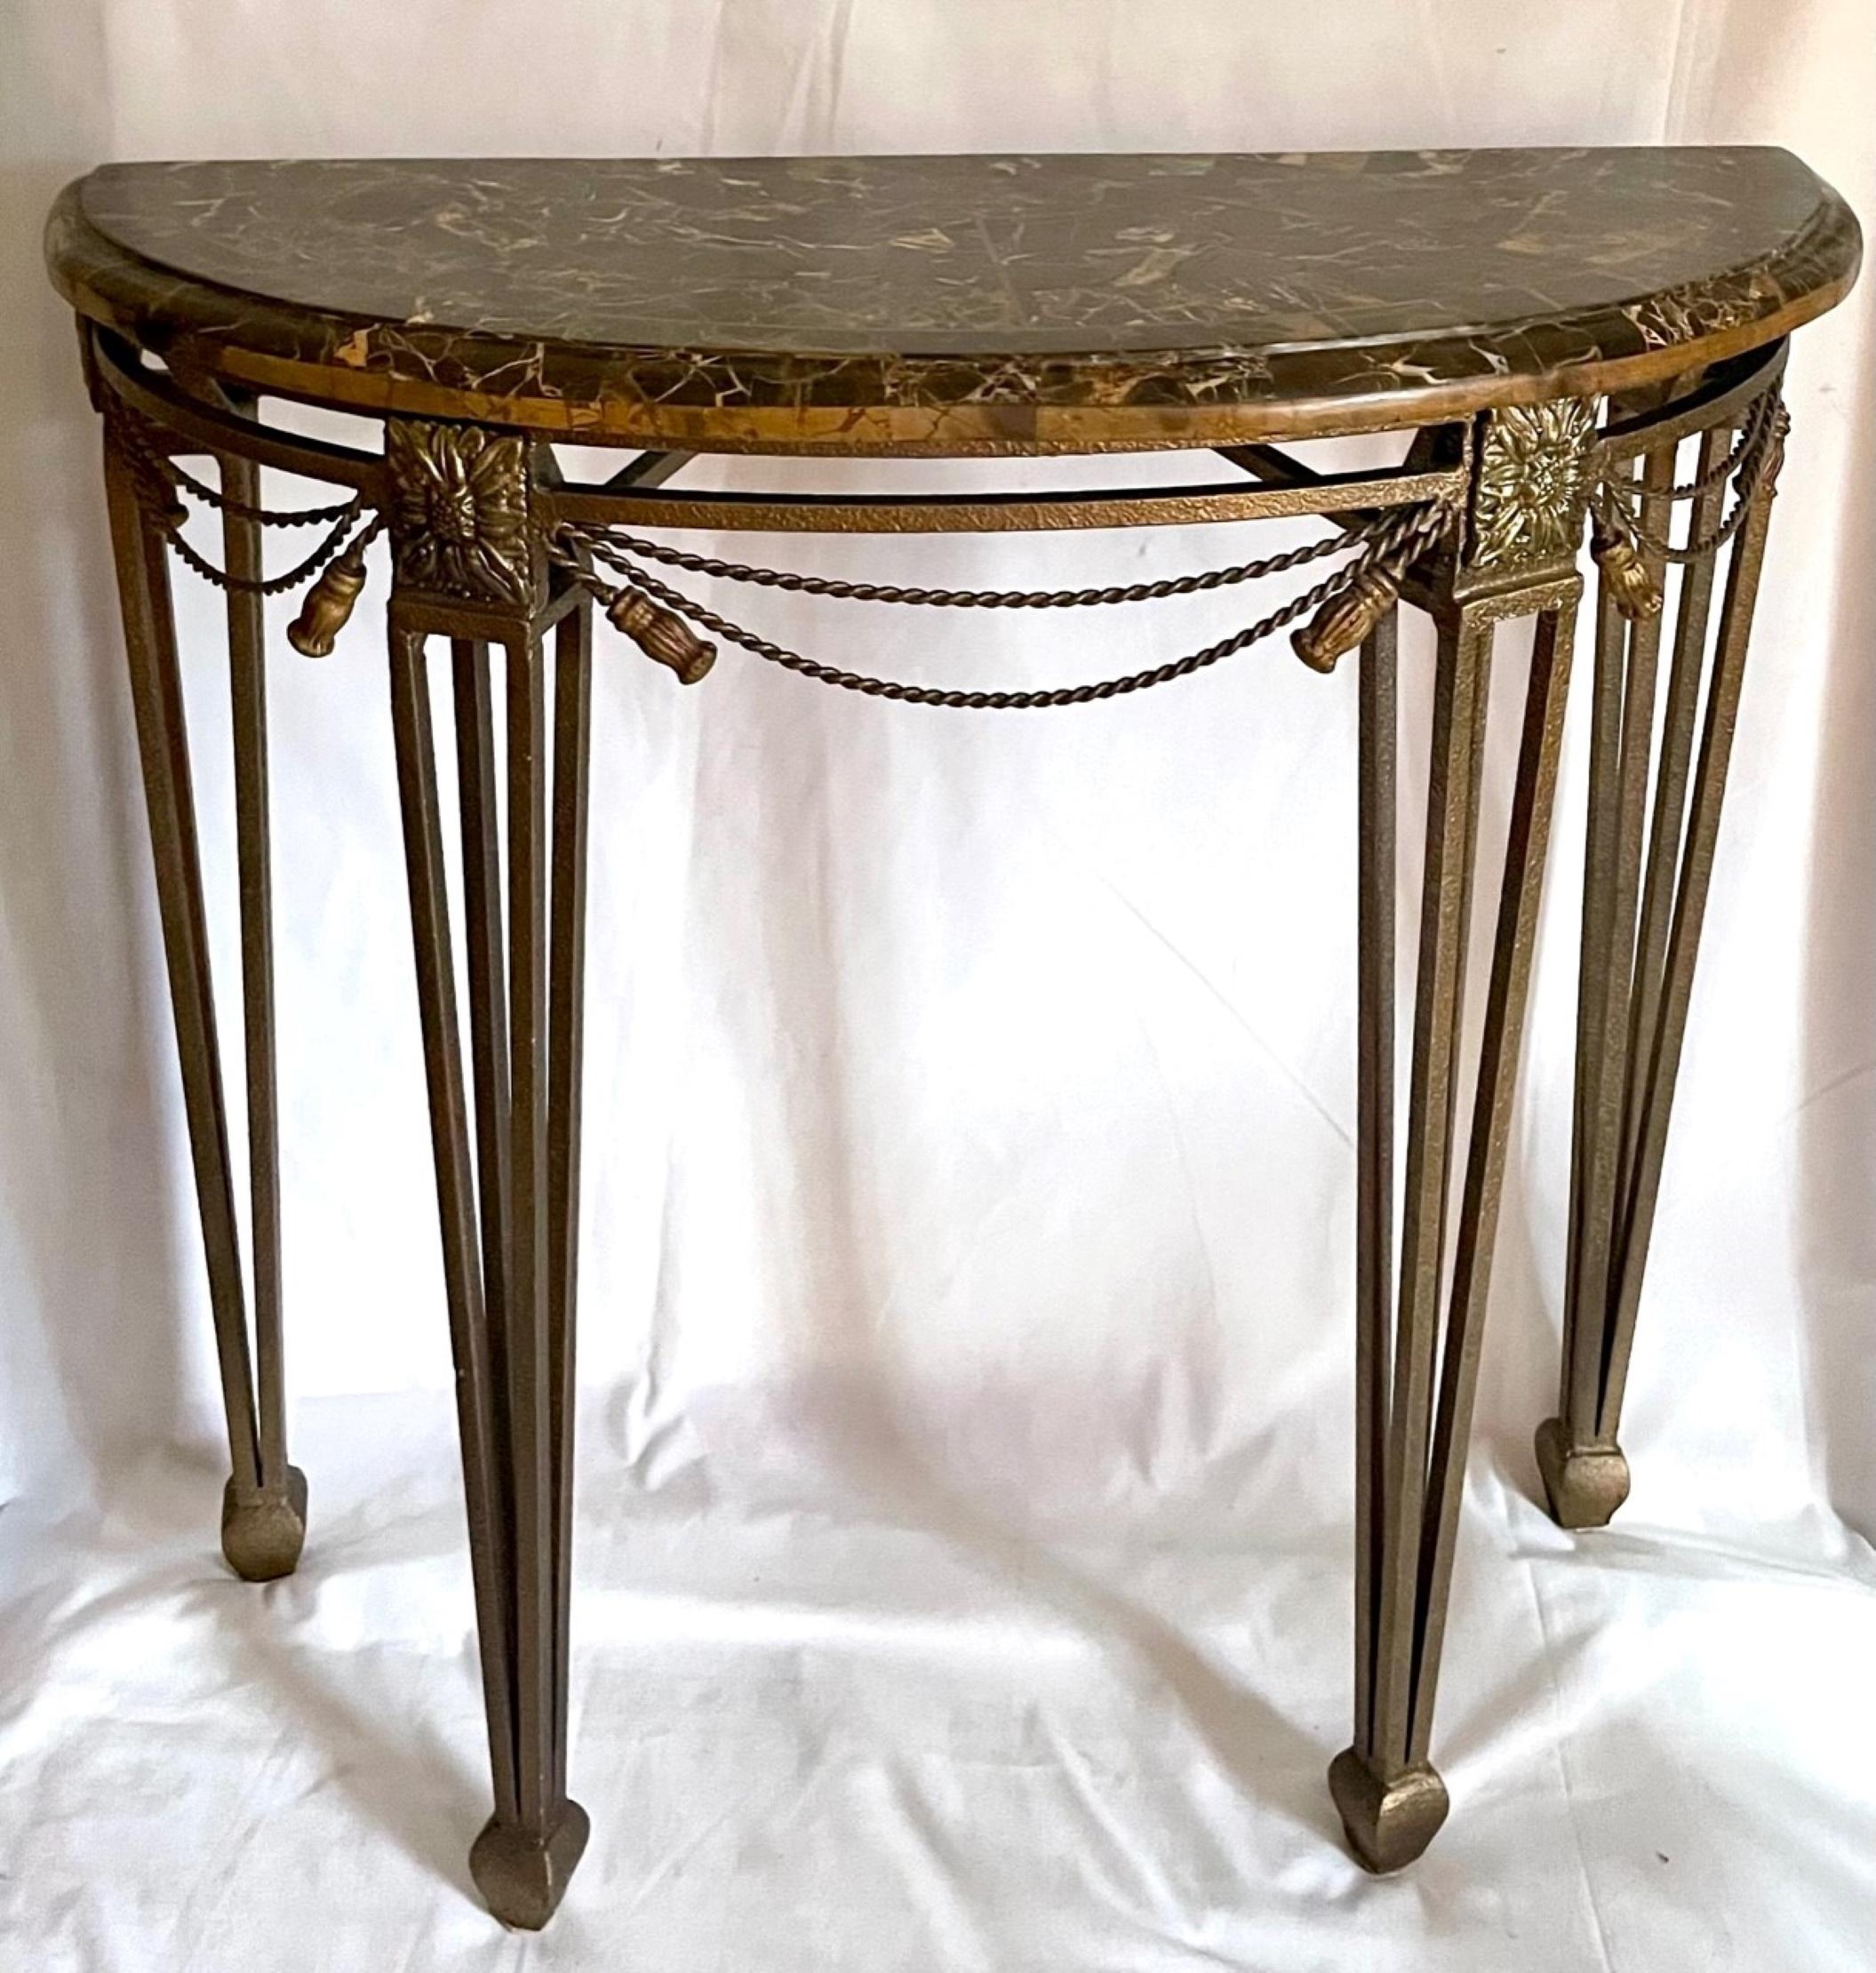 Wrought iron Demilune marble top console table after Oscar Bach

Art Deco style high quality heavy wrought iron demilune marble top
console table after Oscar Bach. The decorative console with elegant lines, features a hammered bronze